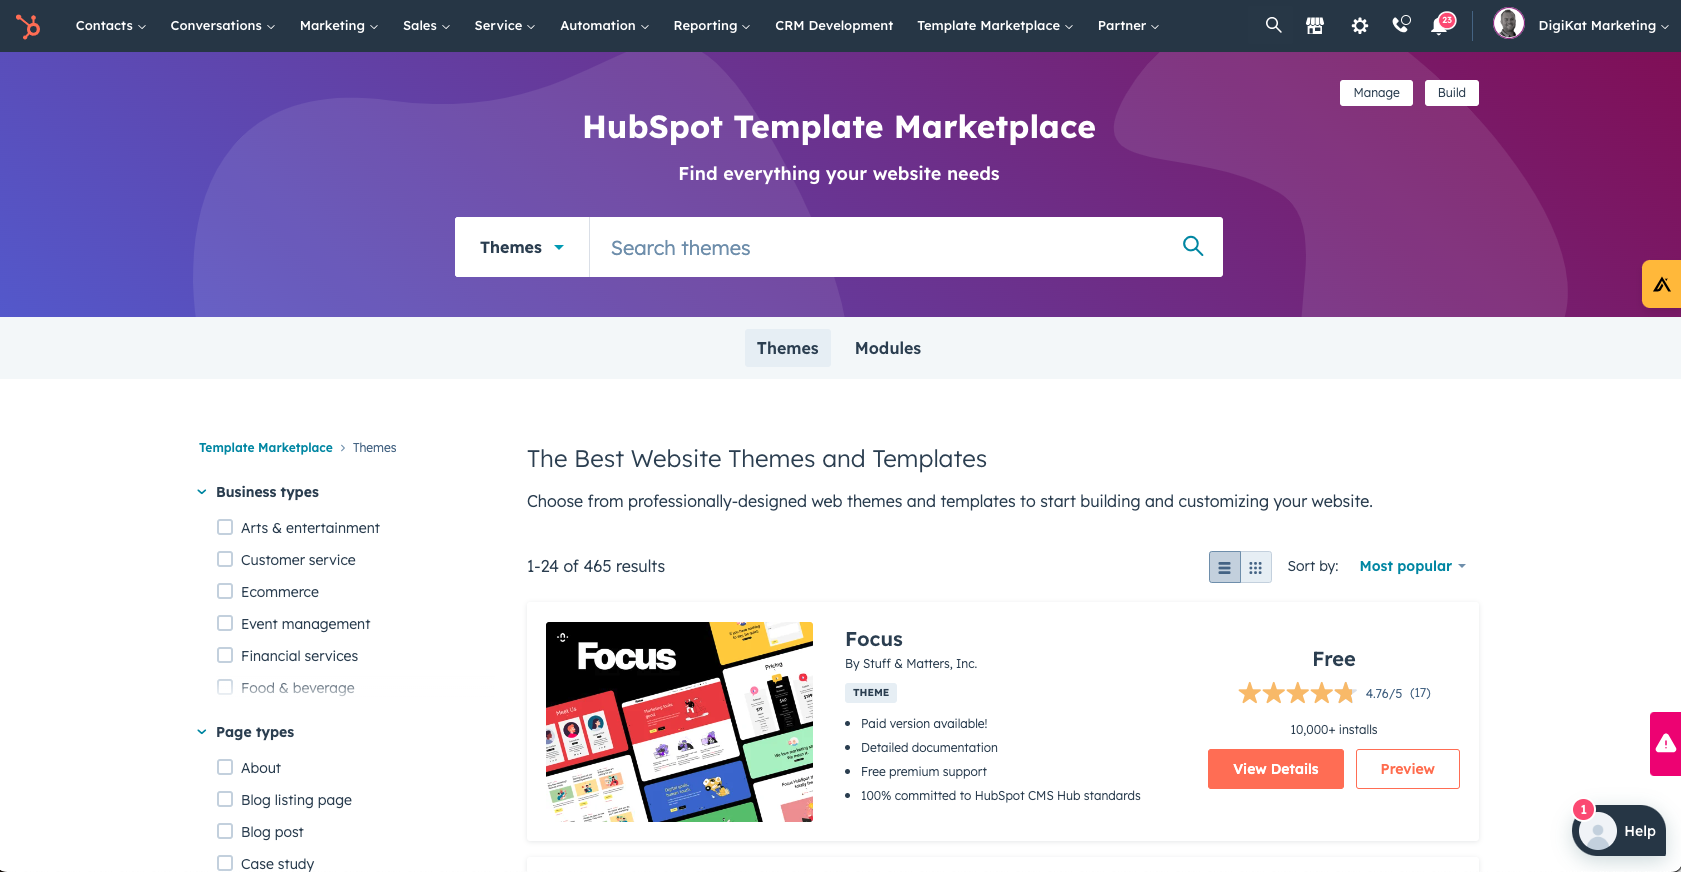 Top 10 Themes in the HubSpot Marketplace